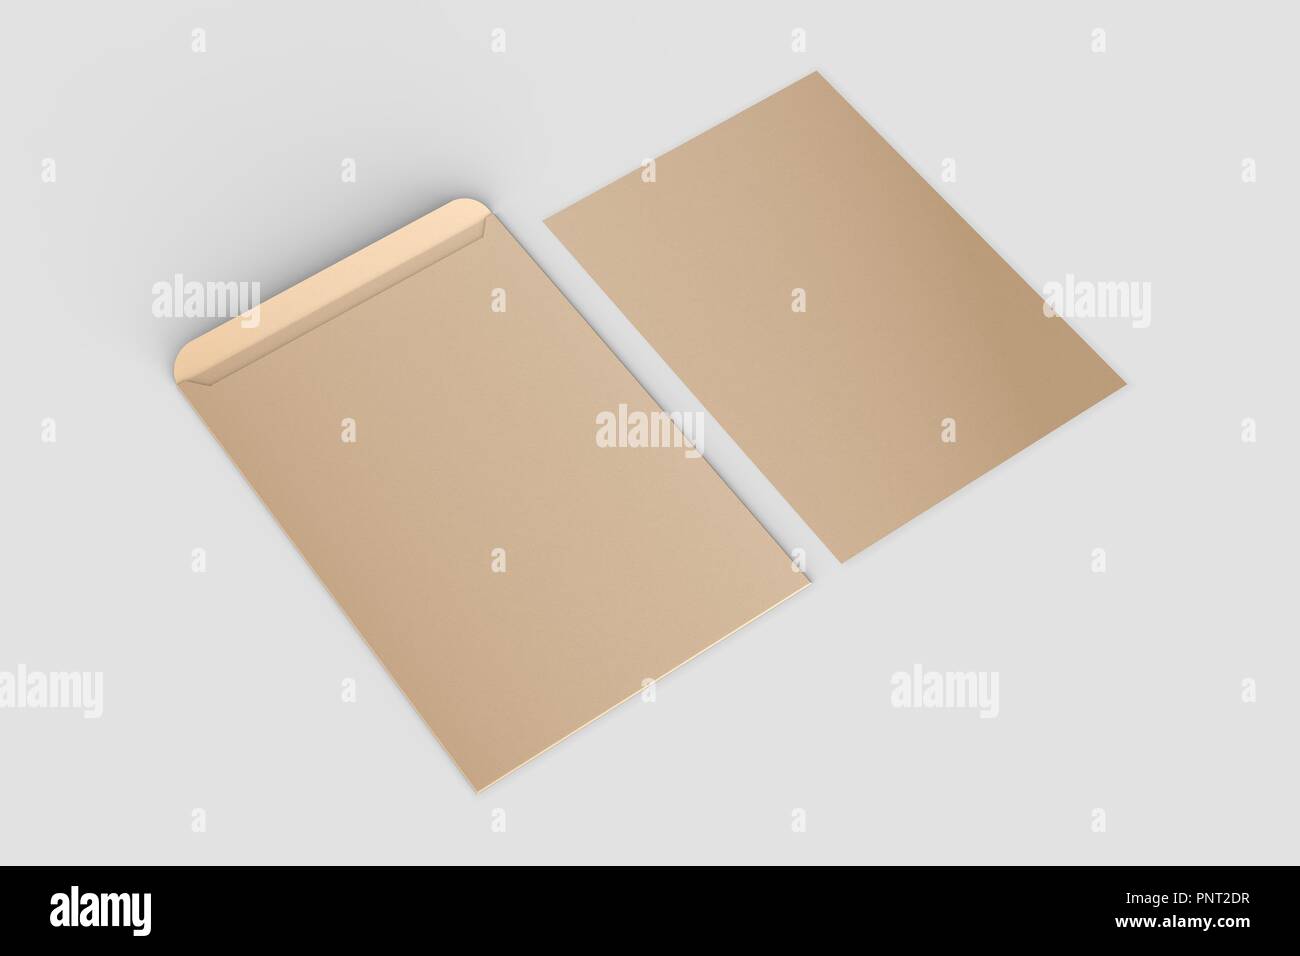 Download Recycled Paper C4 Envelope Mock Up Isolated On Soft Gray Background 3d Illustration Stock Photo Alamy